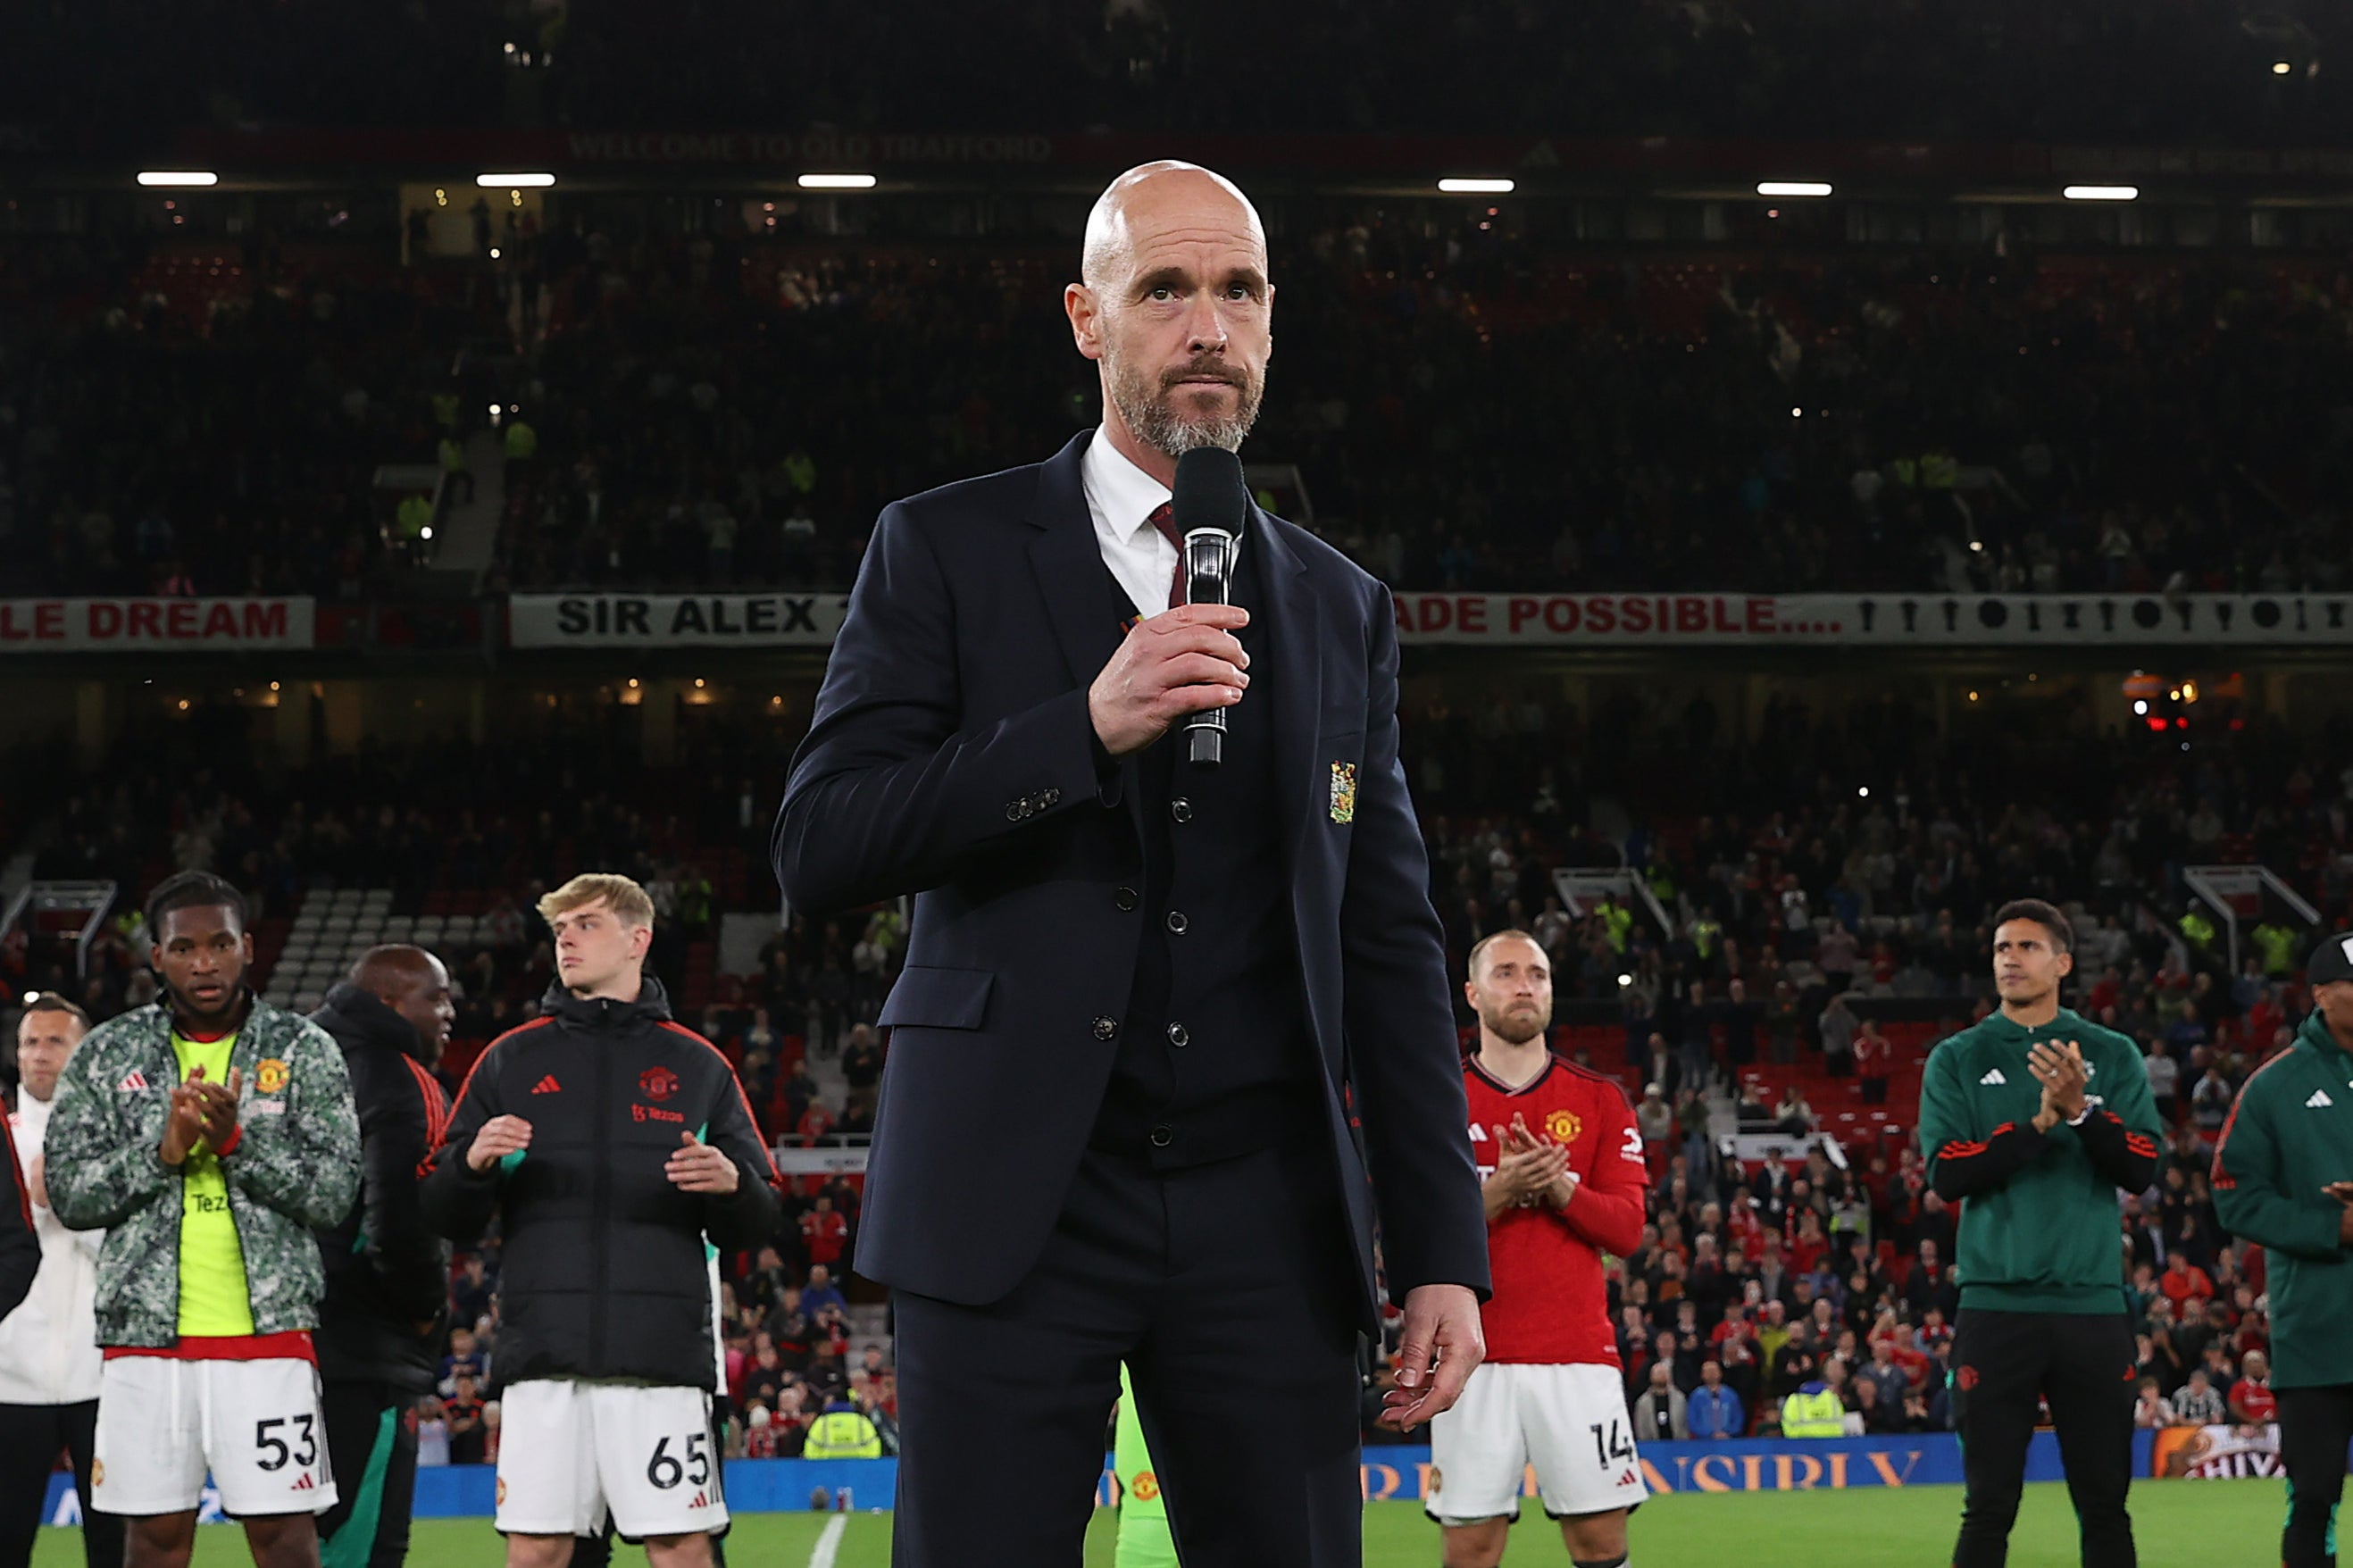 Erik ten Hag will try to galvanise Manchester United to an FA Cup final shock